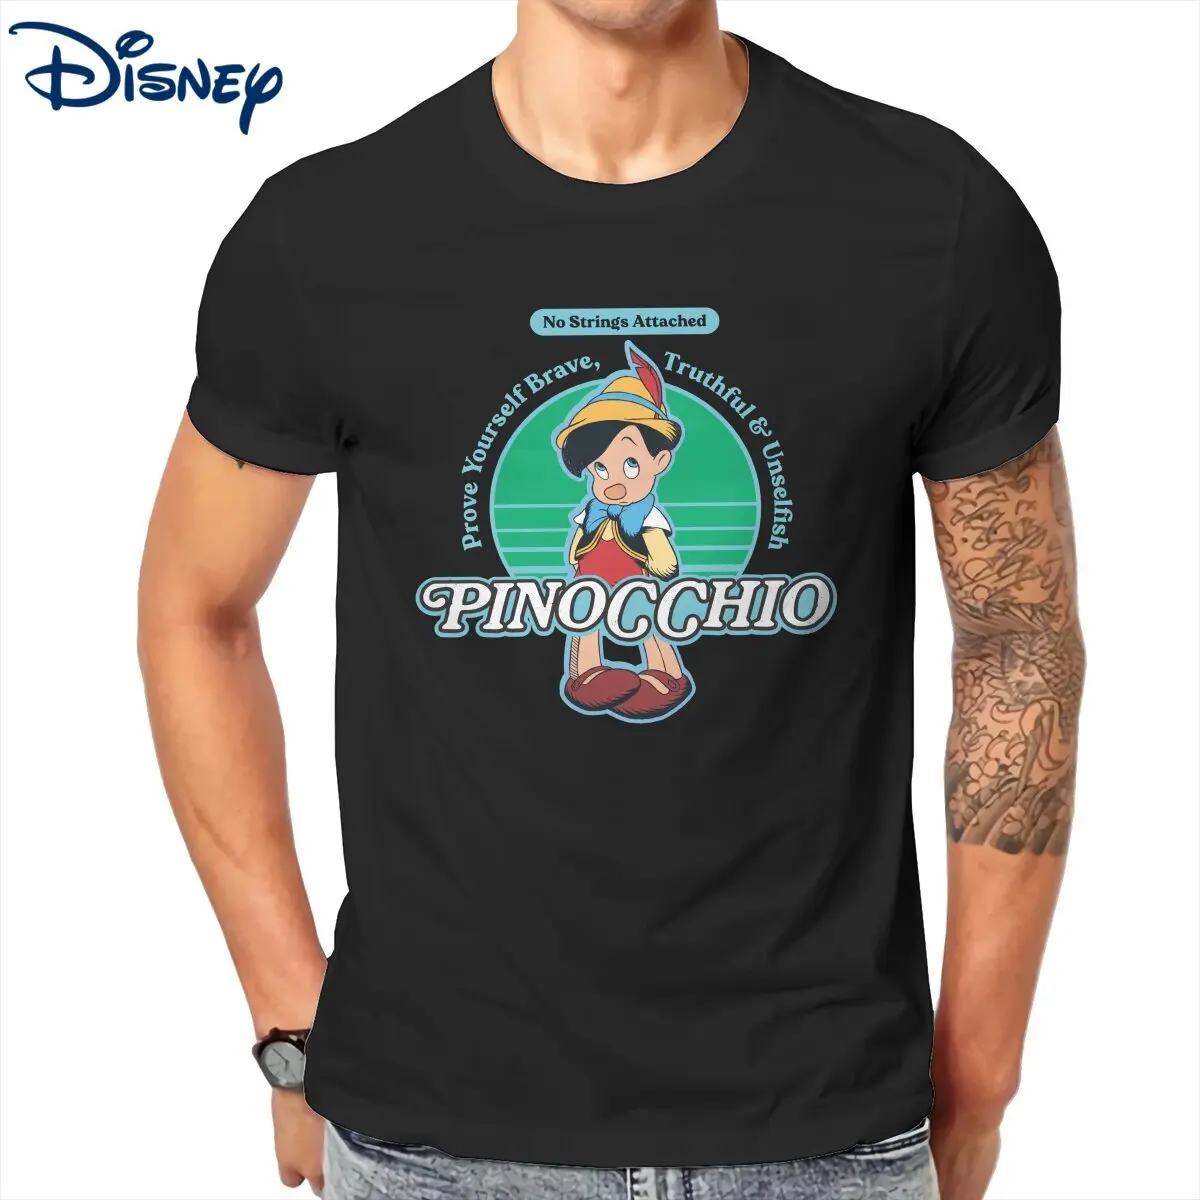 

Pinocchio No Strings Attached T-Shirts for Men Round Neck Cotton T Shirt Vintage Guillermo Short Sleeve Tee Shirt New Clothes